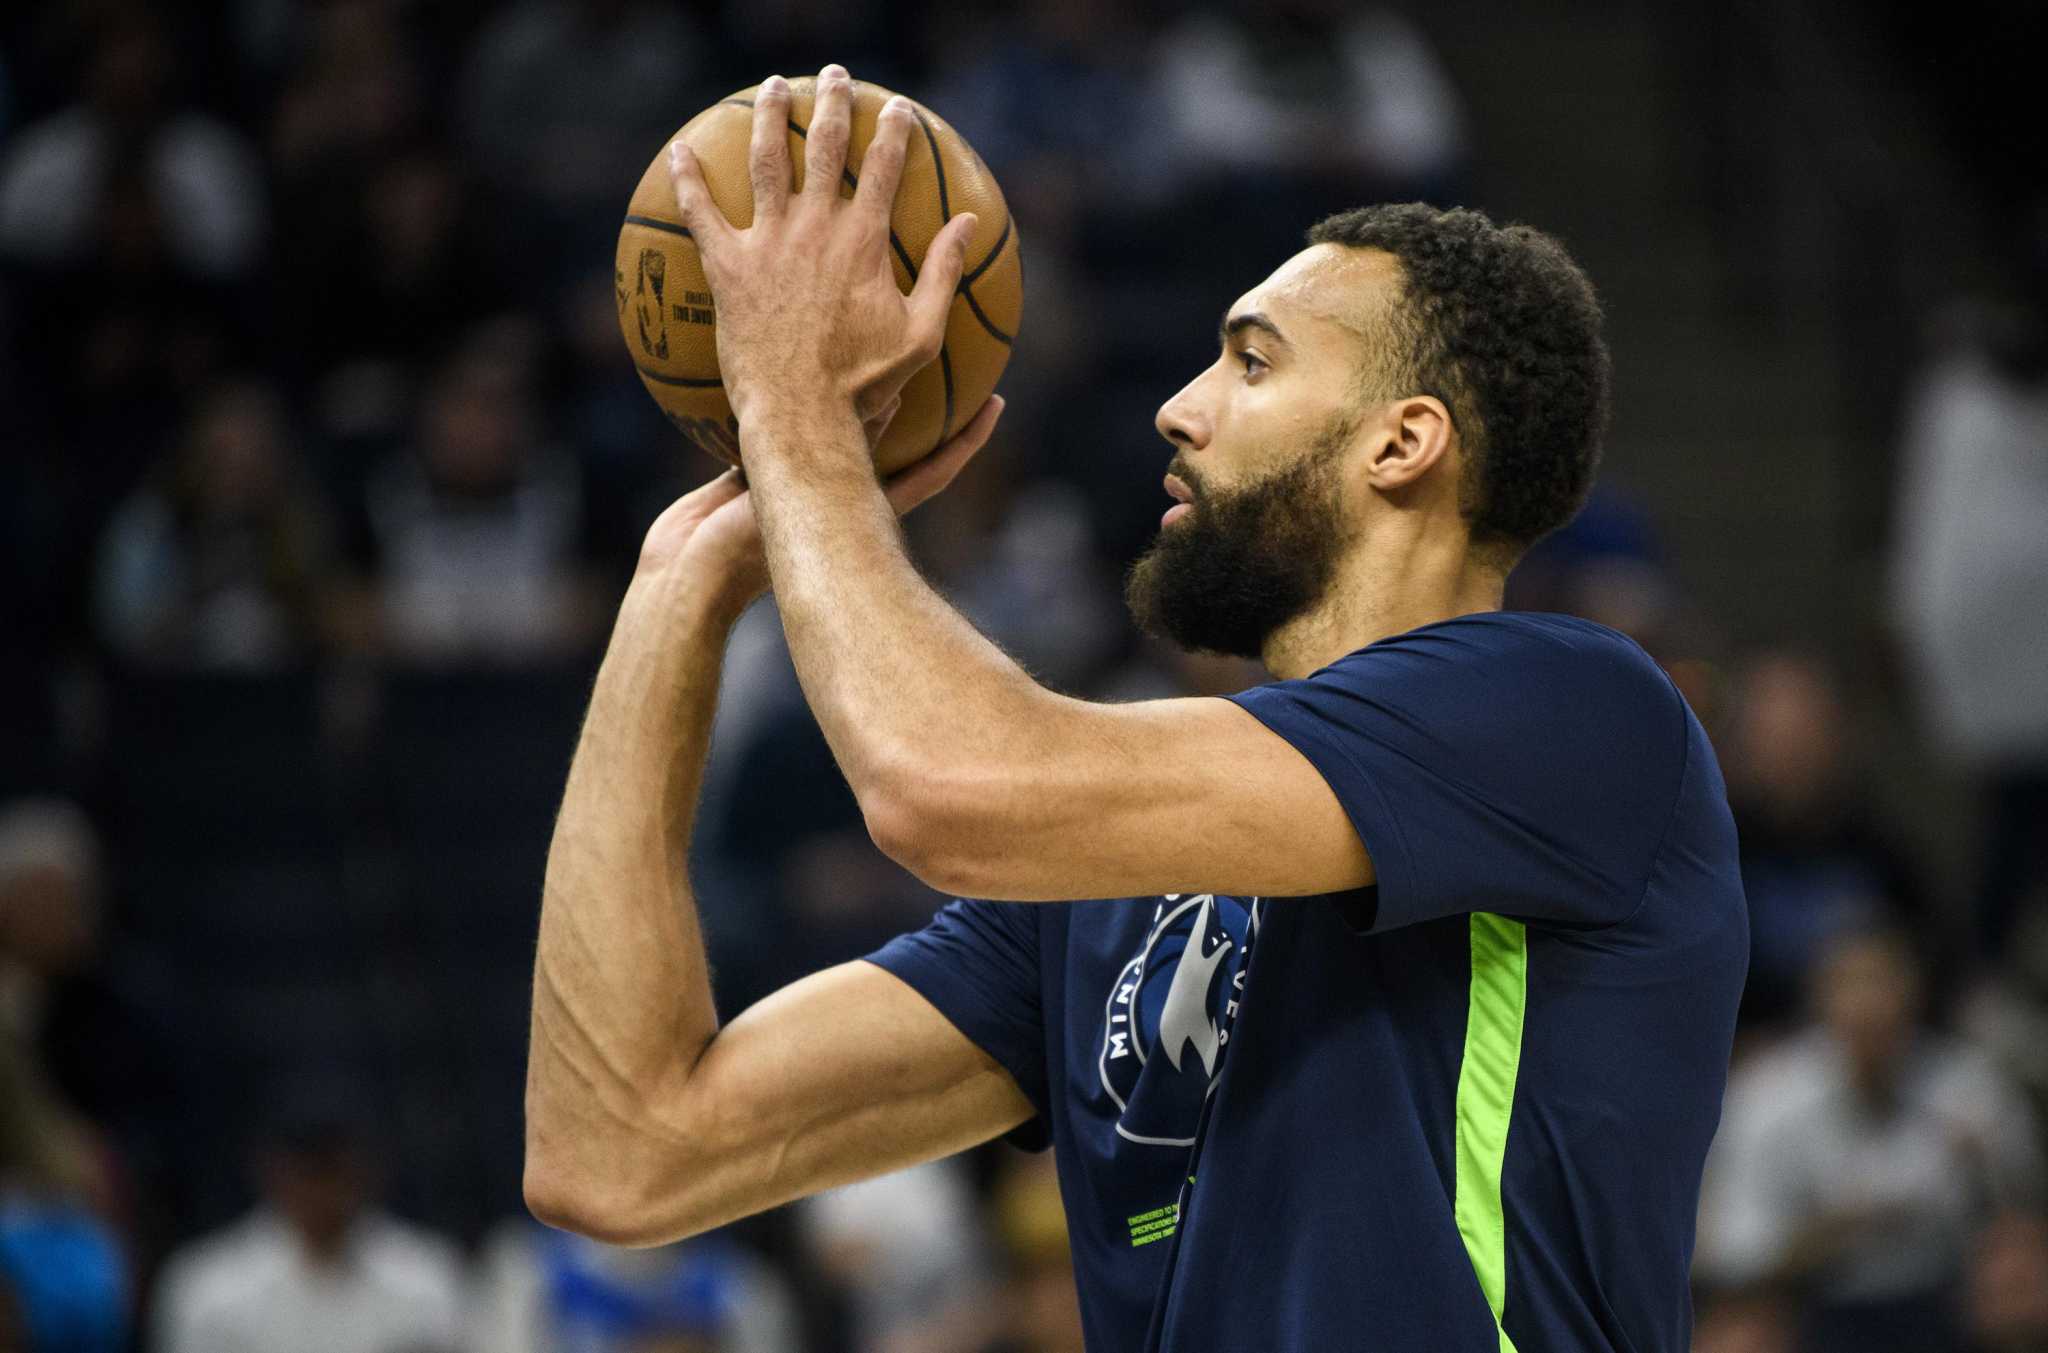 Kyle Anderson showing he is crucial to Minnesota Timberwolves' success